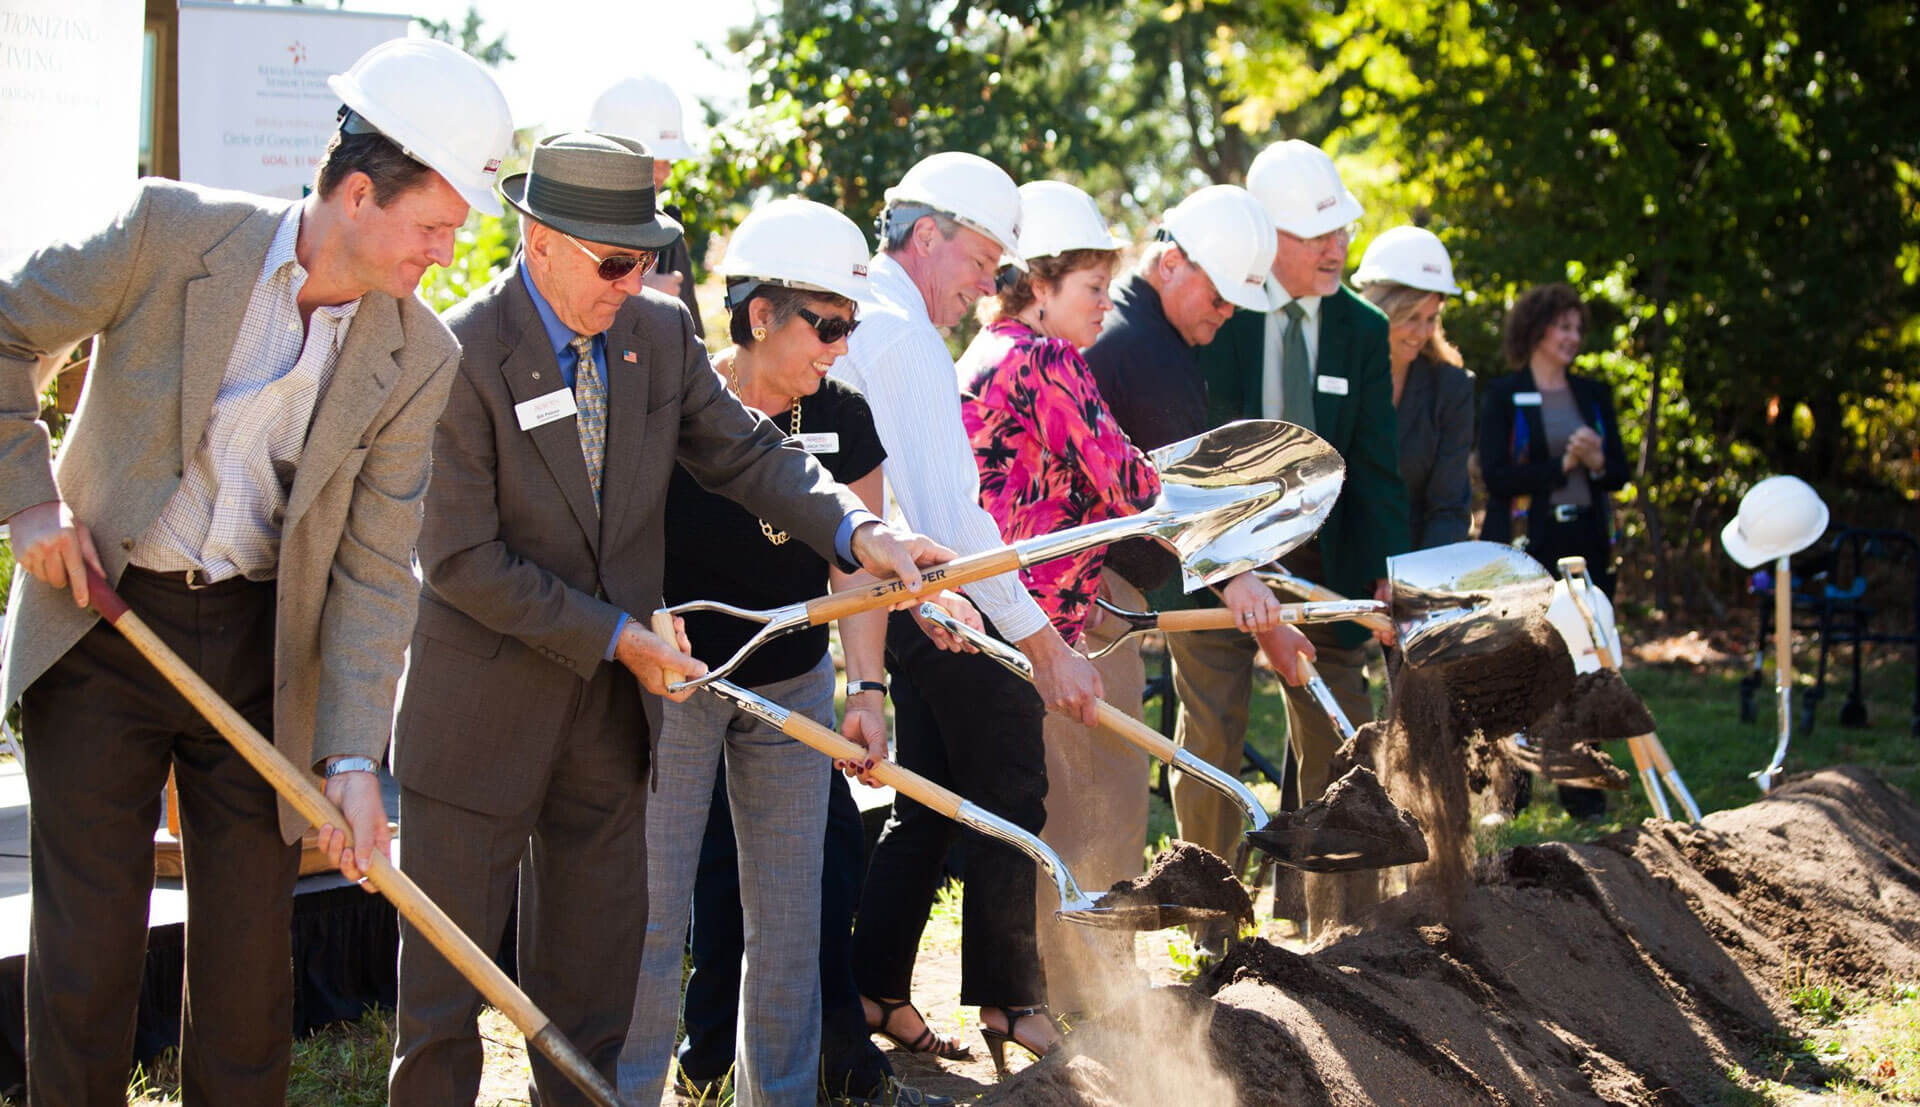 People in business attire and hard hats breaking ground with shovels